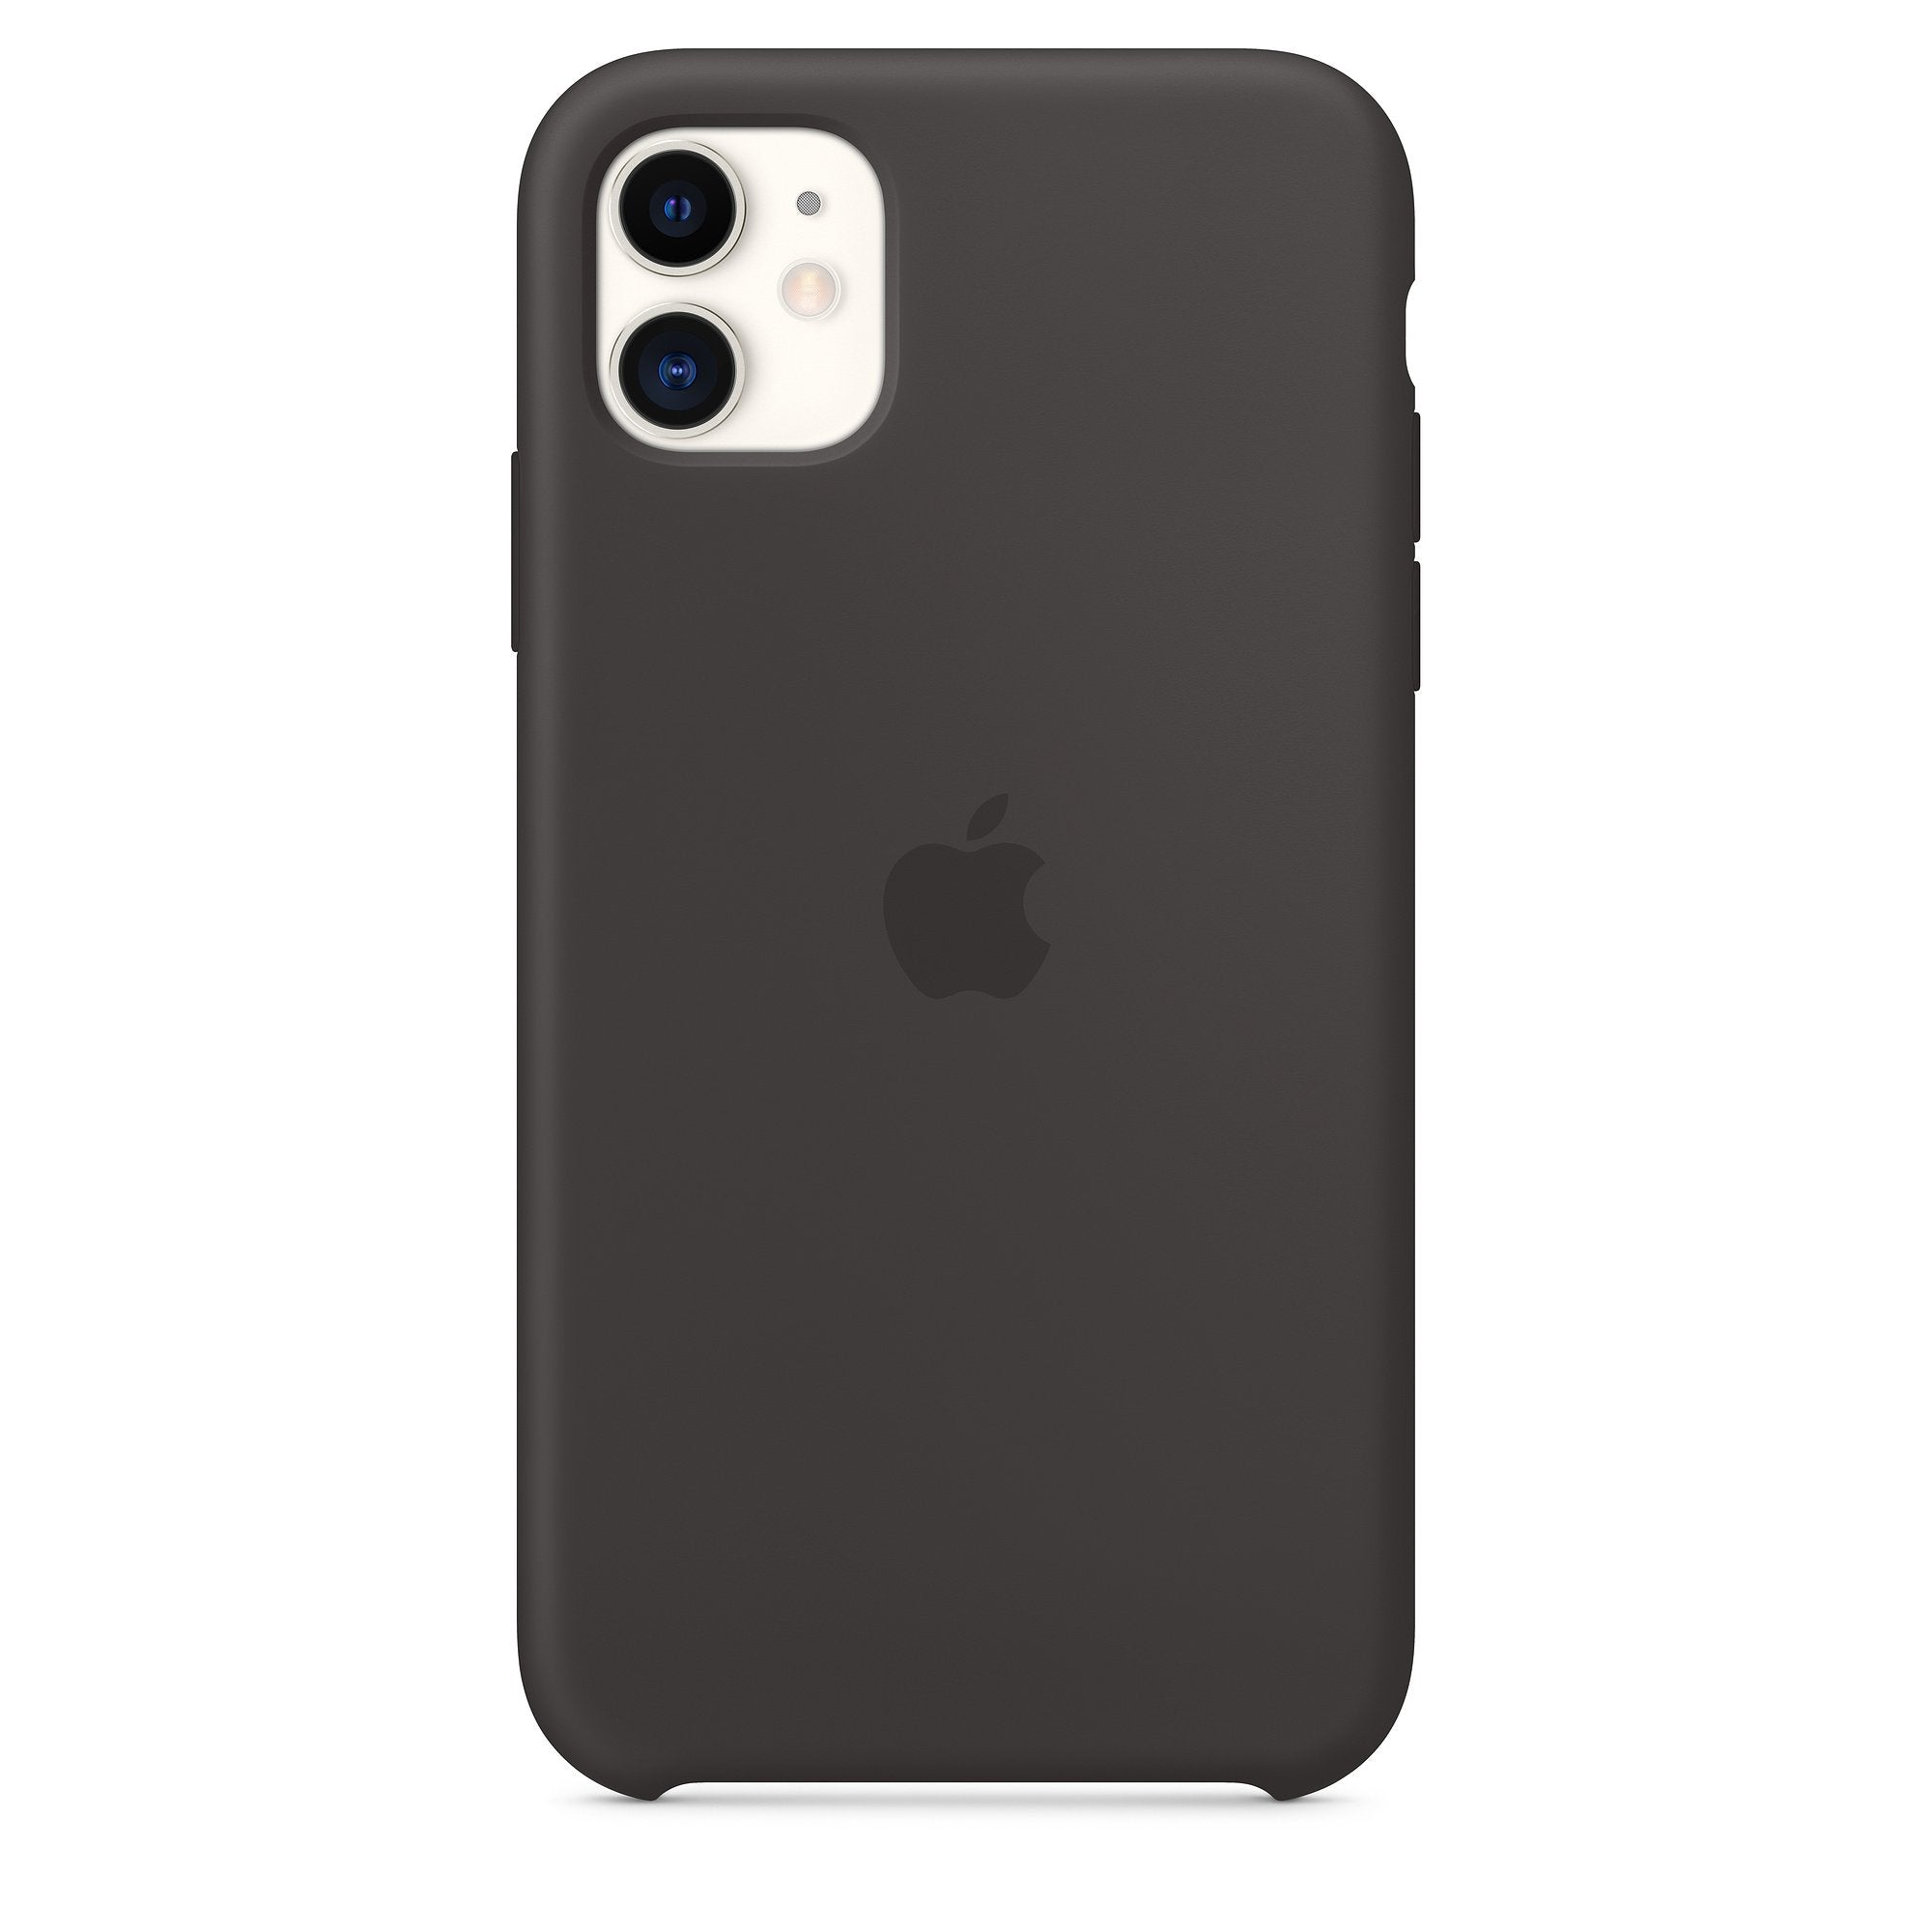 Silicon Case For iPhone 11 - Black - Mobilegadgets360